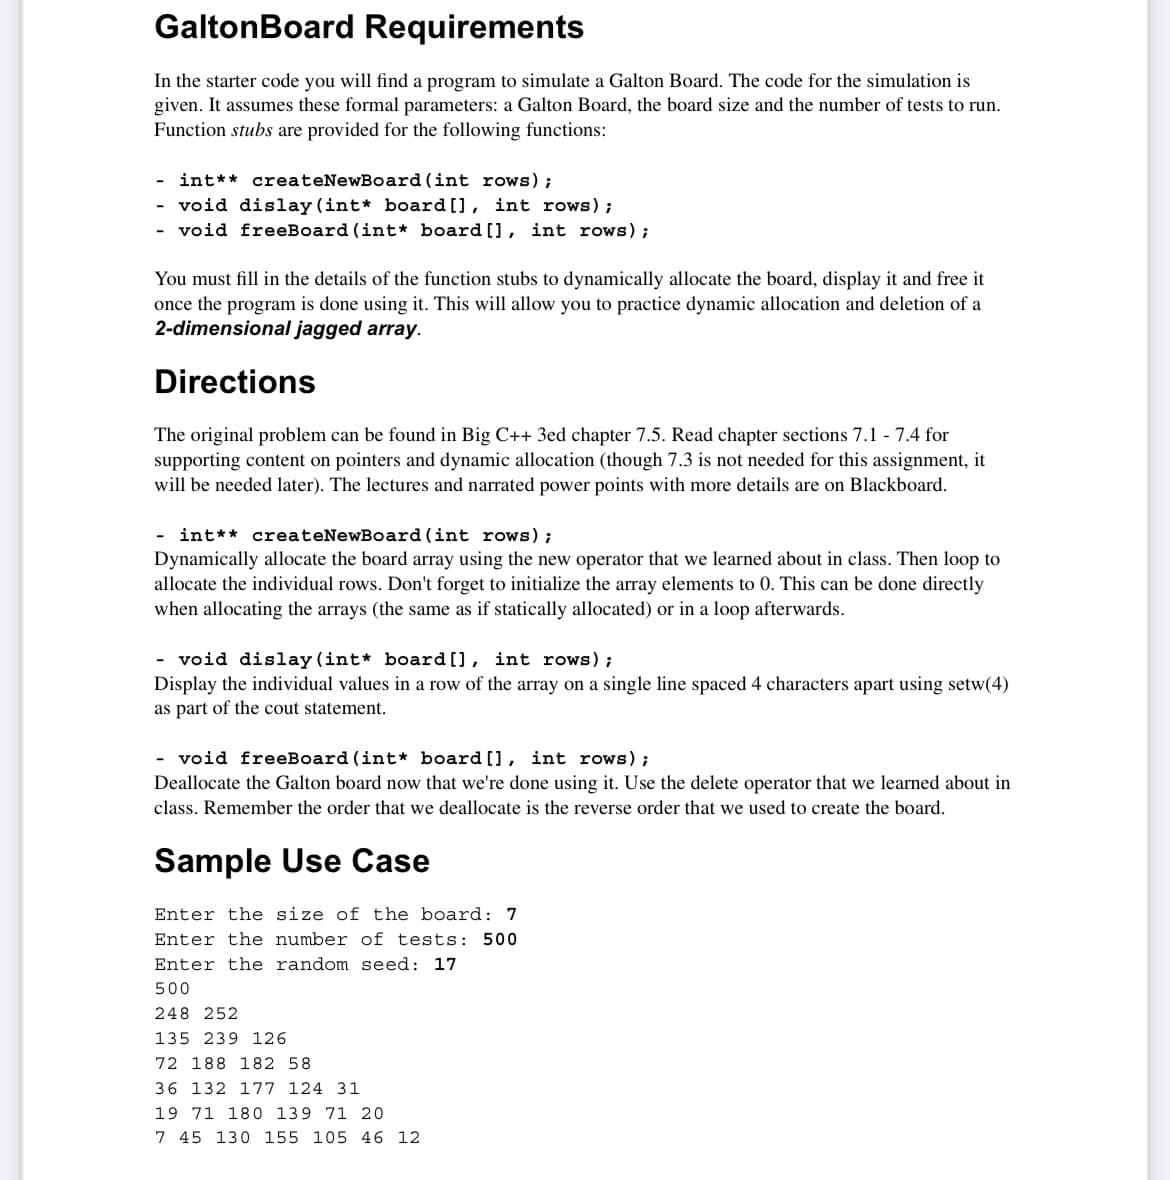 GaltonBoard Requirements
In the starter code you will find a program to simulate a Galton Board. The code for the simulation is
given. It assumes these formal parameters: a Galton Board, the board size and the number of tests to run.
Function stubs are provided for the following functions:
- int** createNewBoard (int rows);
- void dislay (int* board[], int rows);
- void freeBoard (int* board[], int rows);
You must fill in the details of the function stubs to dynamically allocate the board, display it and free it
once the program is done using it. This will allow you to practice dynamic allocation and deletion of a
2-dimensional jagged array.
Directions
The original problem can be found in Big C++ 3ed chapter 7.5. Read chapter sections 7.1 - 7.4 for
supporting content on pointers and dynamic allocation (though 7.3 is not needed for this assignment, it
will be needed later). The lectures and narrated power points with more details are on Blackboard.
- int** createNewBoard (int rows);
Dynamically allocate the board array using the new operator that we learned about in class. Then loop to
allocate the individual rows. Don't forget to initialize the array elements to 0. This can be done directly
when allocating the arrays (the same as if statically allocated) or in a loop afterwards.
- void dislay (int* board[], int rows);
Display the individual values in a row of the array on a single line spaced 4 characters apart using setw(4)
as part of the cout statement.
- void freeBoard (int* board [], int rows);
Deallocate the Galton board now that we're done using it. Use the delete operator that we learned about in
class. Remember the order that we deallocate is the reverse order that we used to create the board.
Sample Use Case
Enter the size of the board: 7
Enter the number of tests: 500
Enter the random seed: 17
500
248 252
135 239 126
72 188 182 58
36 132 177 124 31
19 71 180 139 71 20
7 45 130 155 105 46 12
